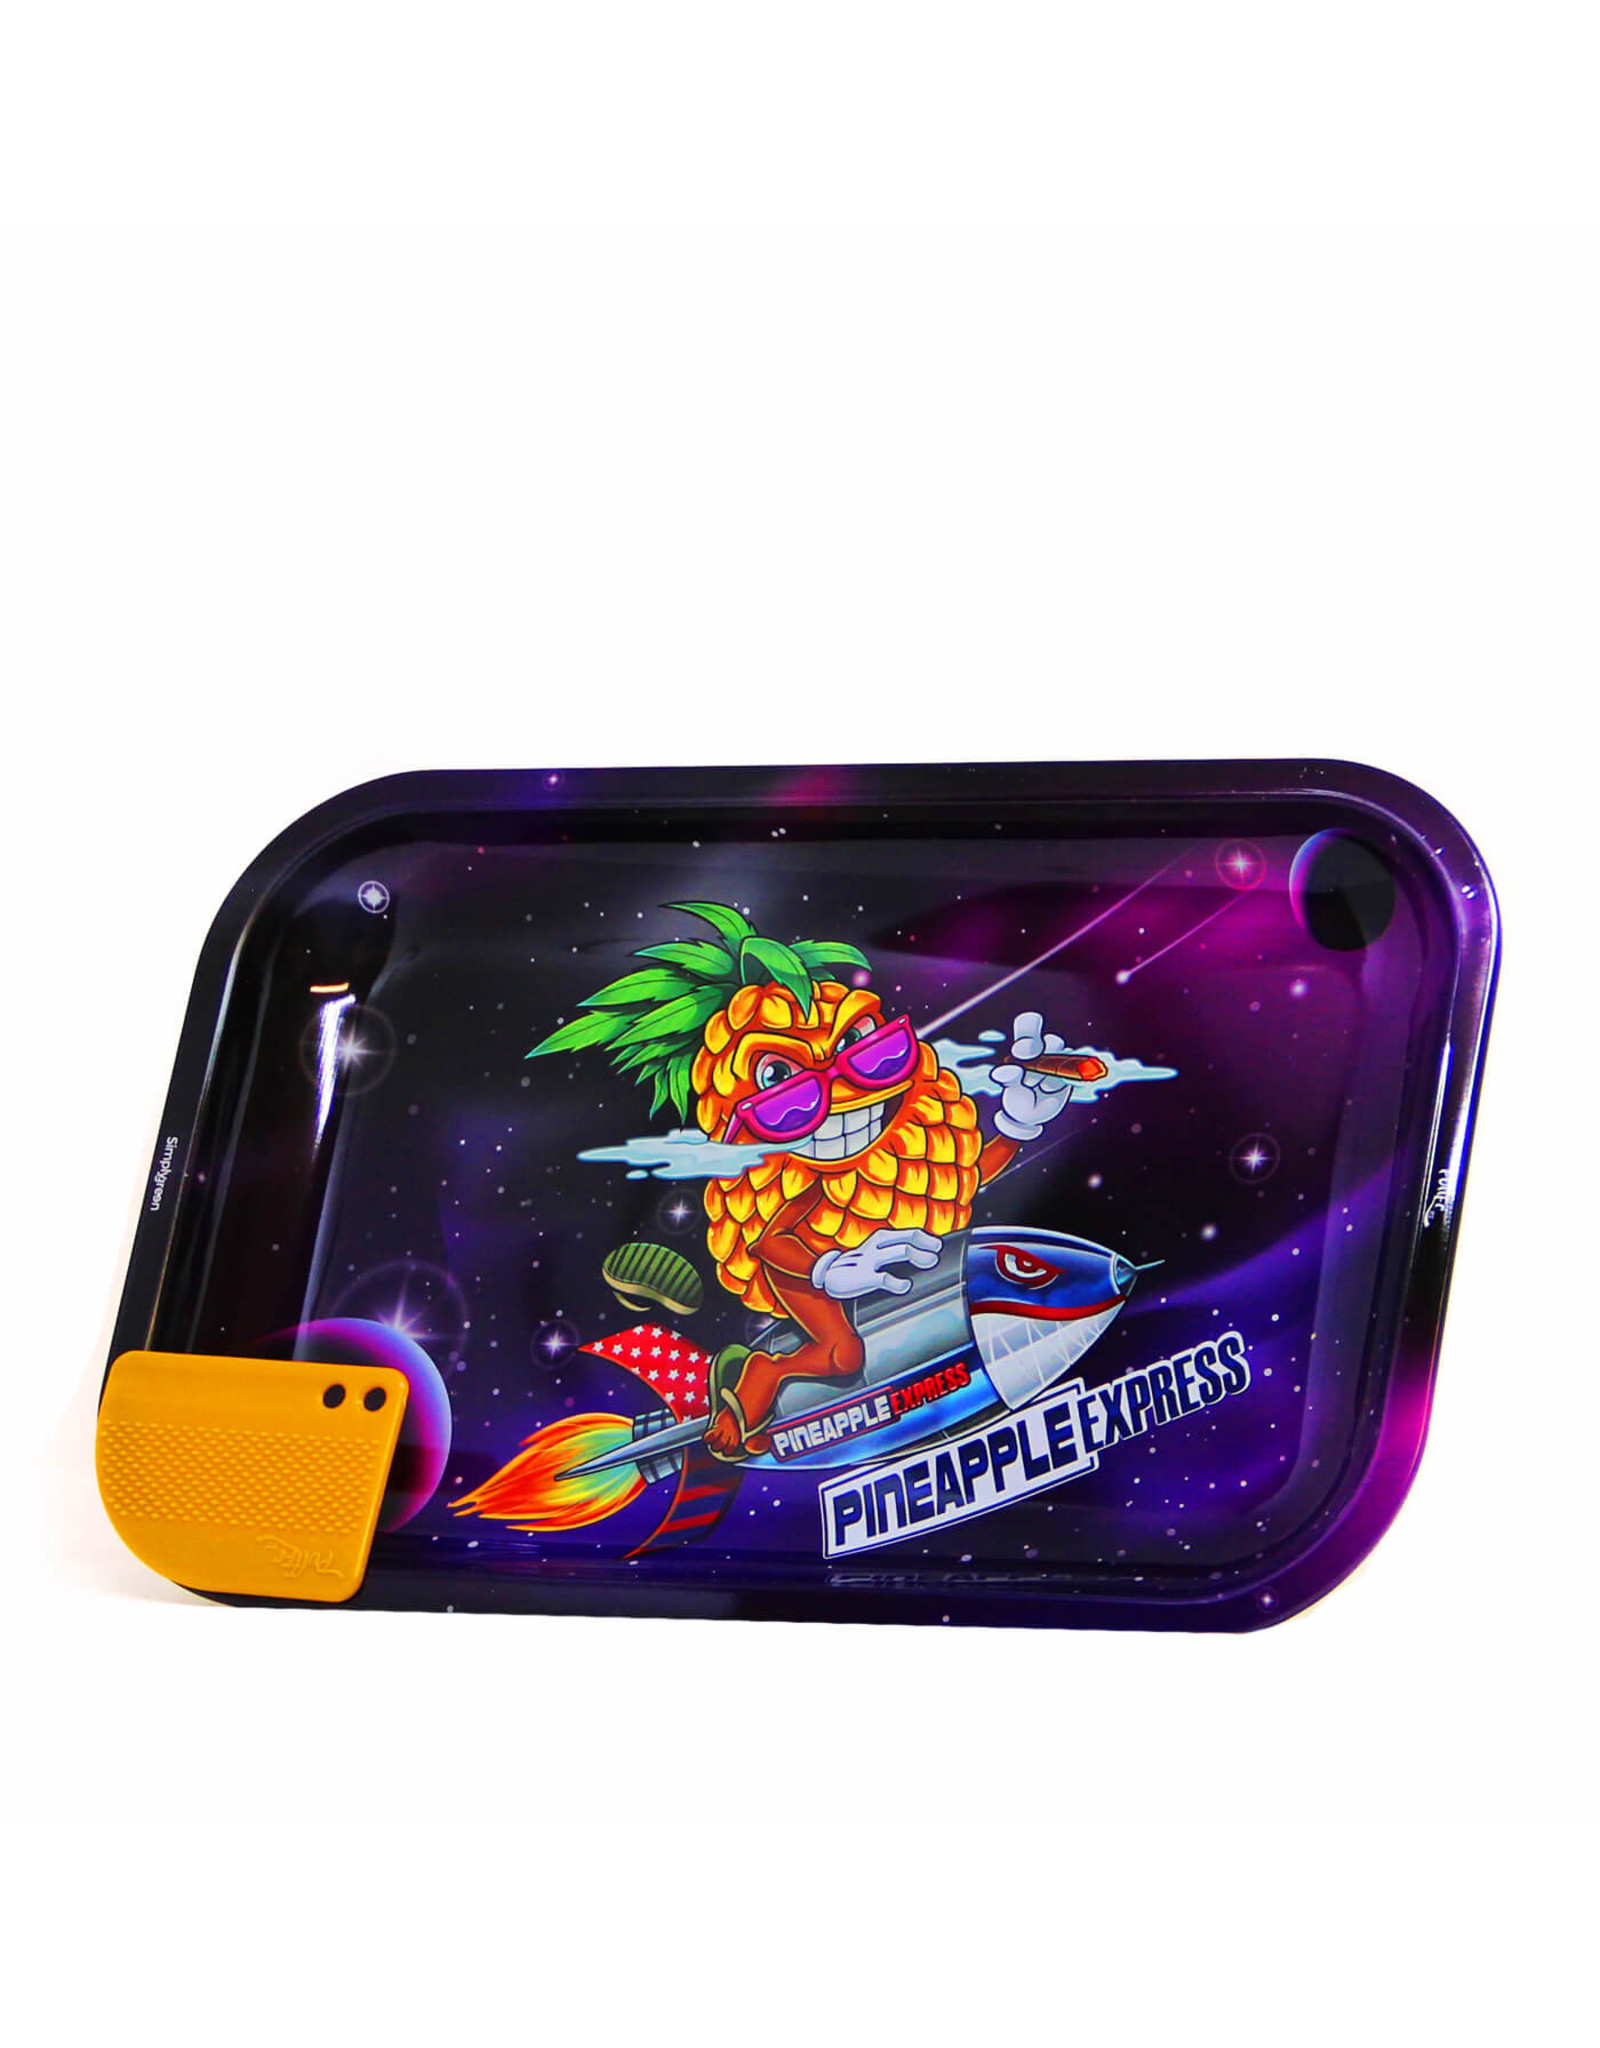 Best Buds Pineapple Express Rolling Tray